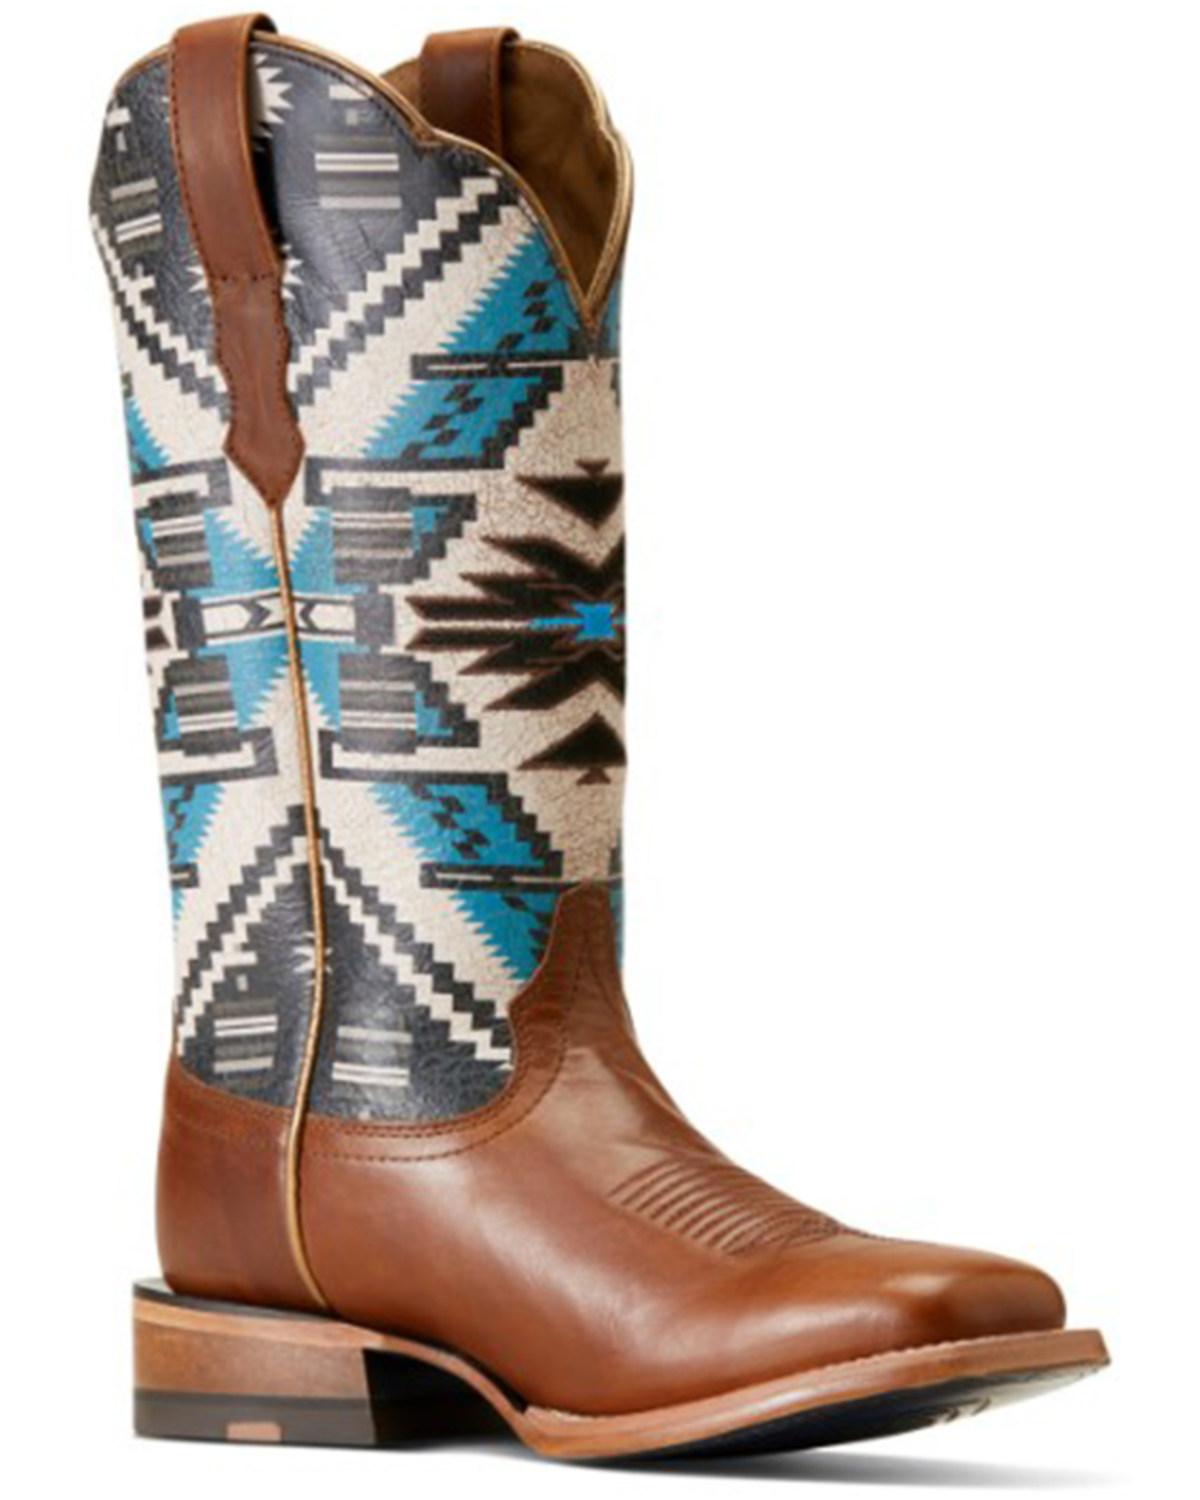 Ariat Women's Chimayo Southwestern Boots - Broad Square Toe